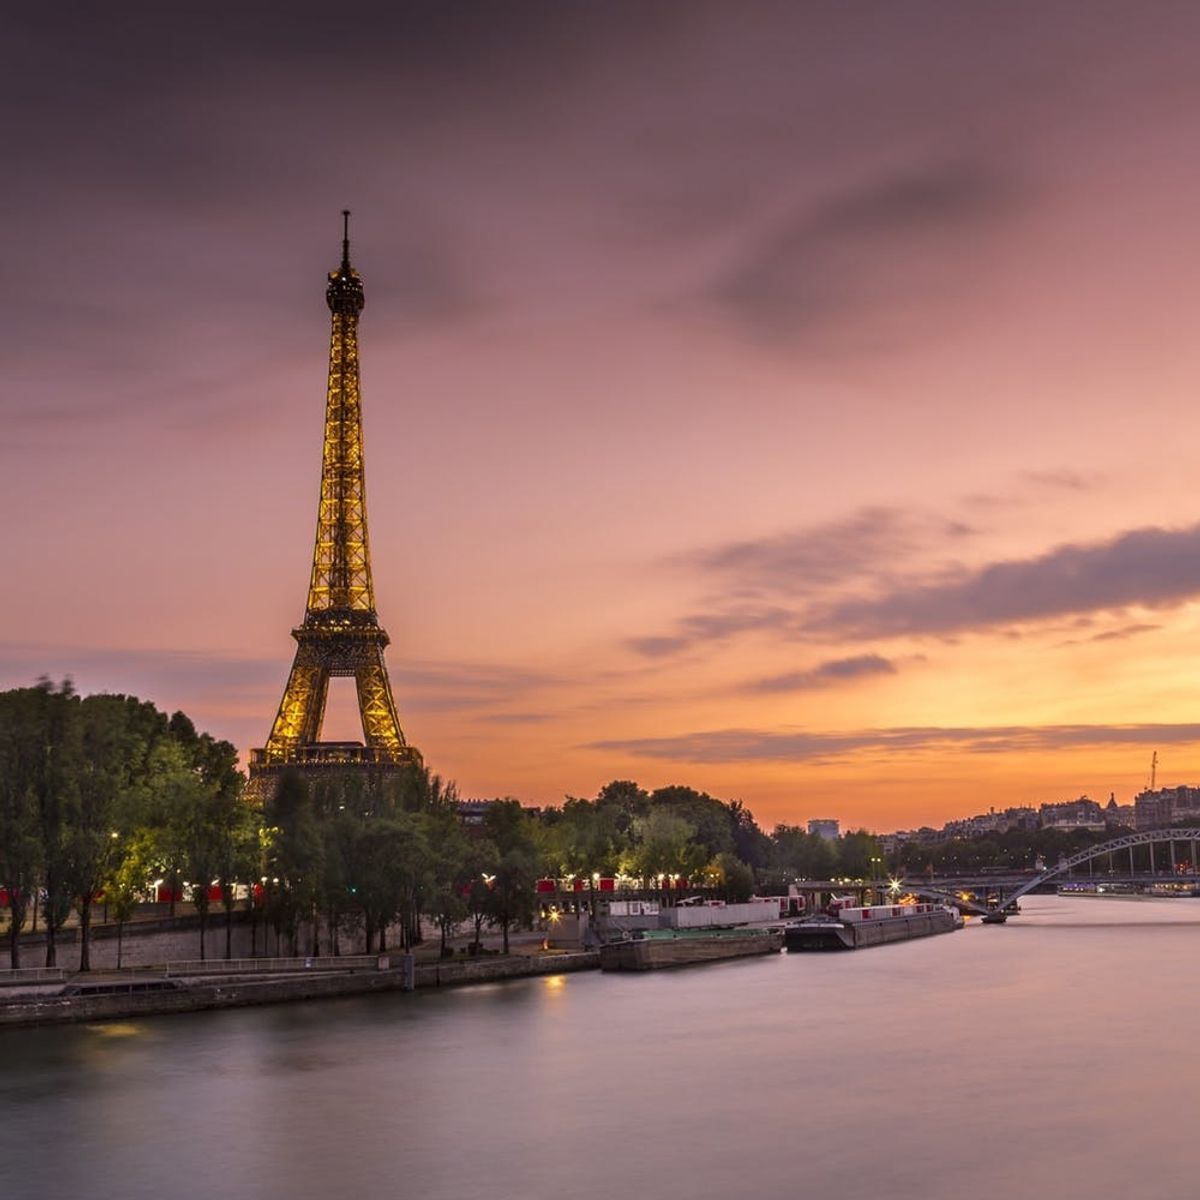 Paris Is Planning to Surround the Eiffel Tower With Bulletproof Glass